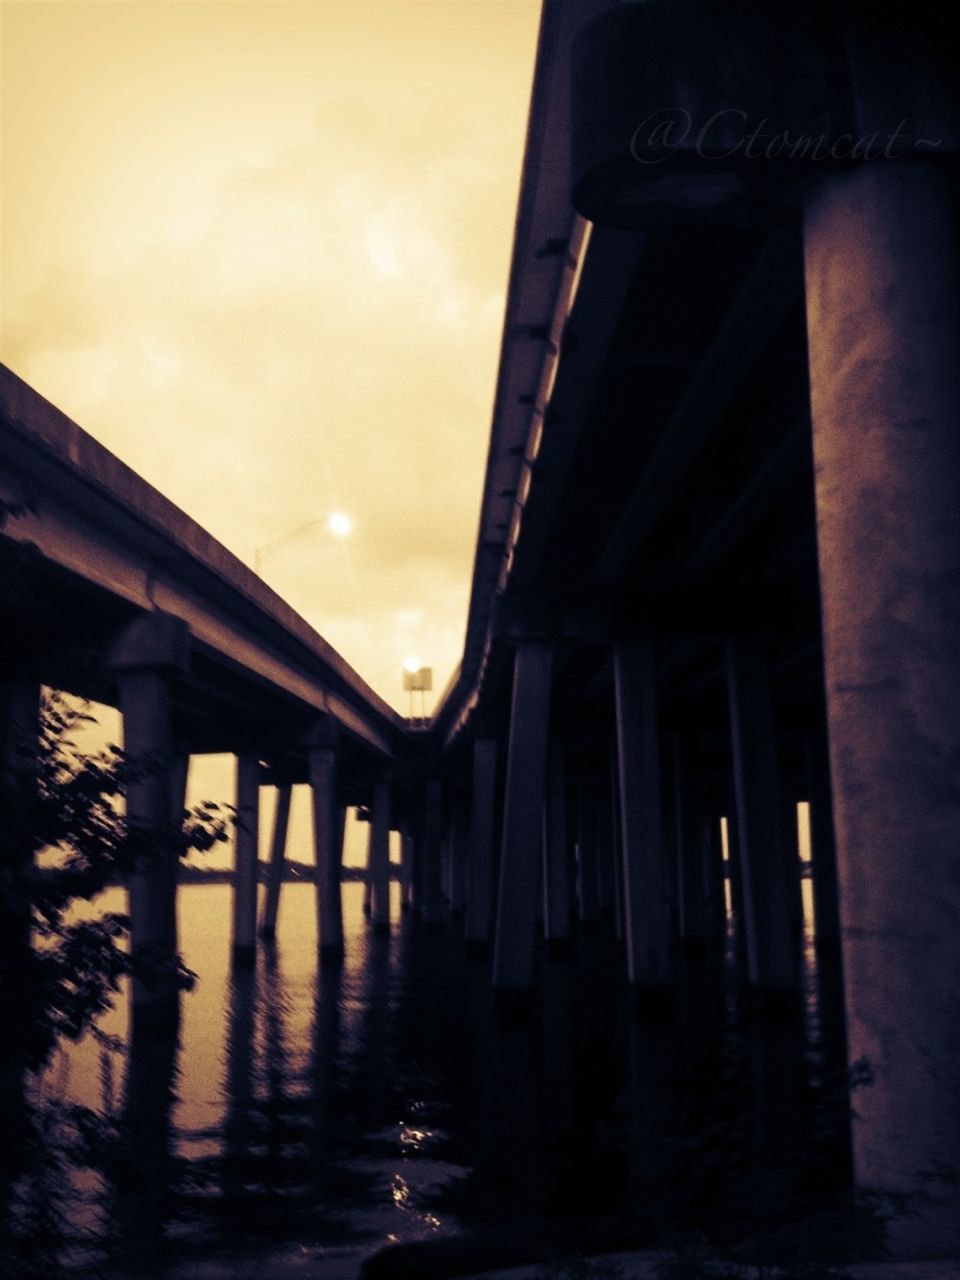 built structure, architecture, sunset, architectural column, sky, bridge - man made structure, water, column, building exterior, reflection, low angle view, connection, cloud - sky, bridge, waterfront, pier, sea, support, sunlight, outdoors